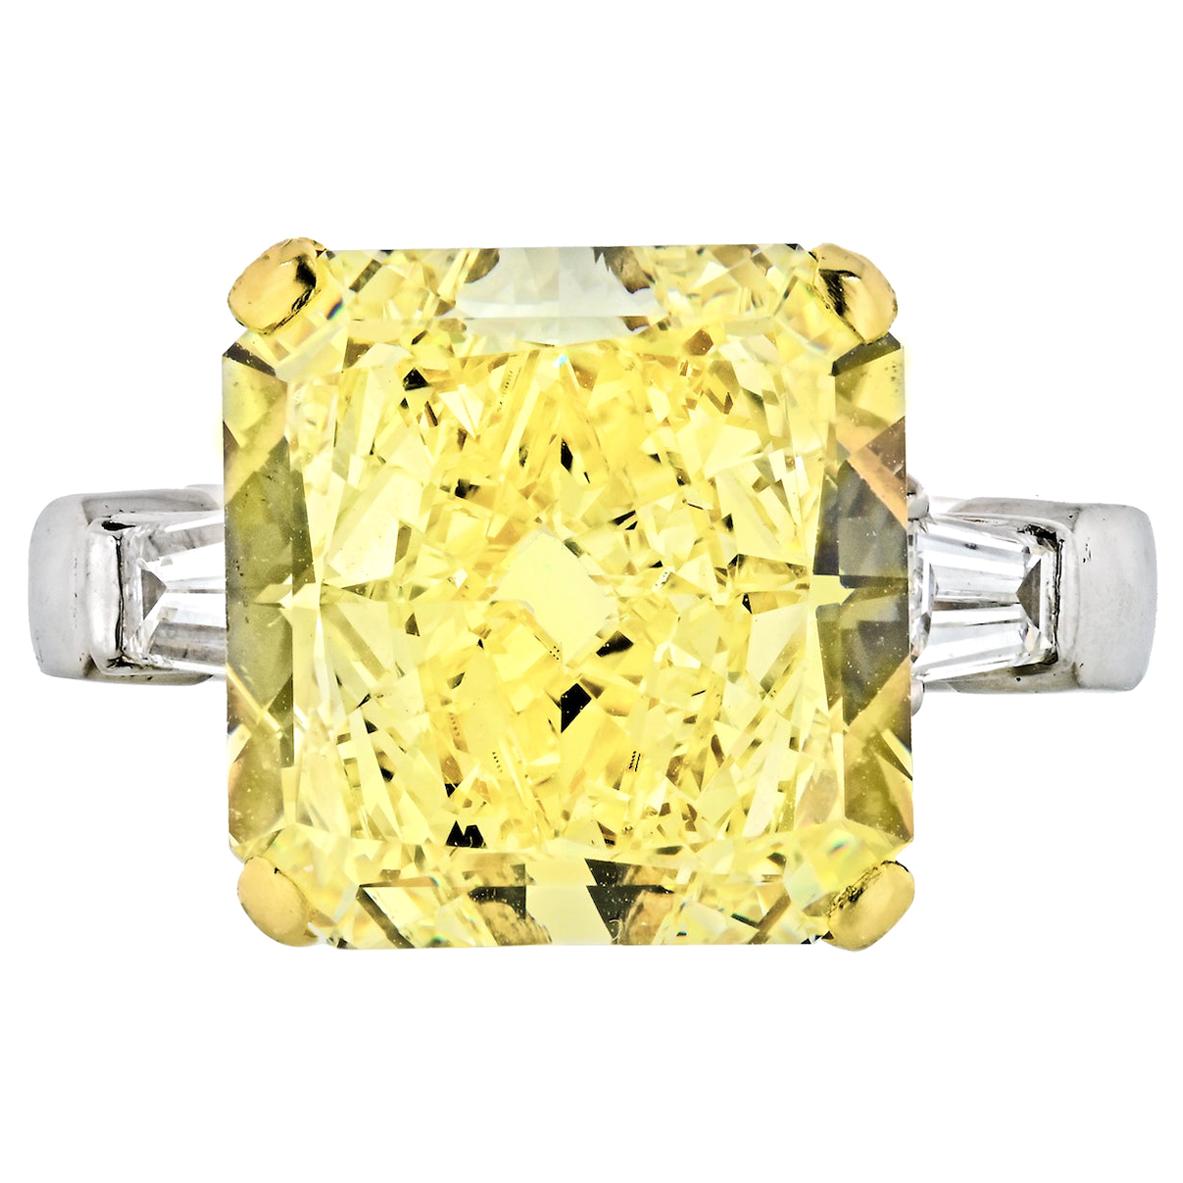 Important GIA Certified Graff 13.11 Carat Radiant Cut Natural Fancy Yellow Diamond, Platinum, and 18 Karat Yellow Gold Engagement Ring. Accented with two bullet shape diamonds approx. .30 each. 
Yellow diamond VS2 clarity. Fully inscribed to the